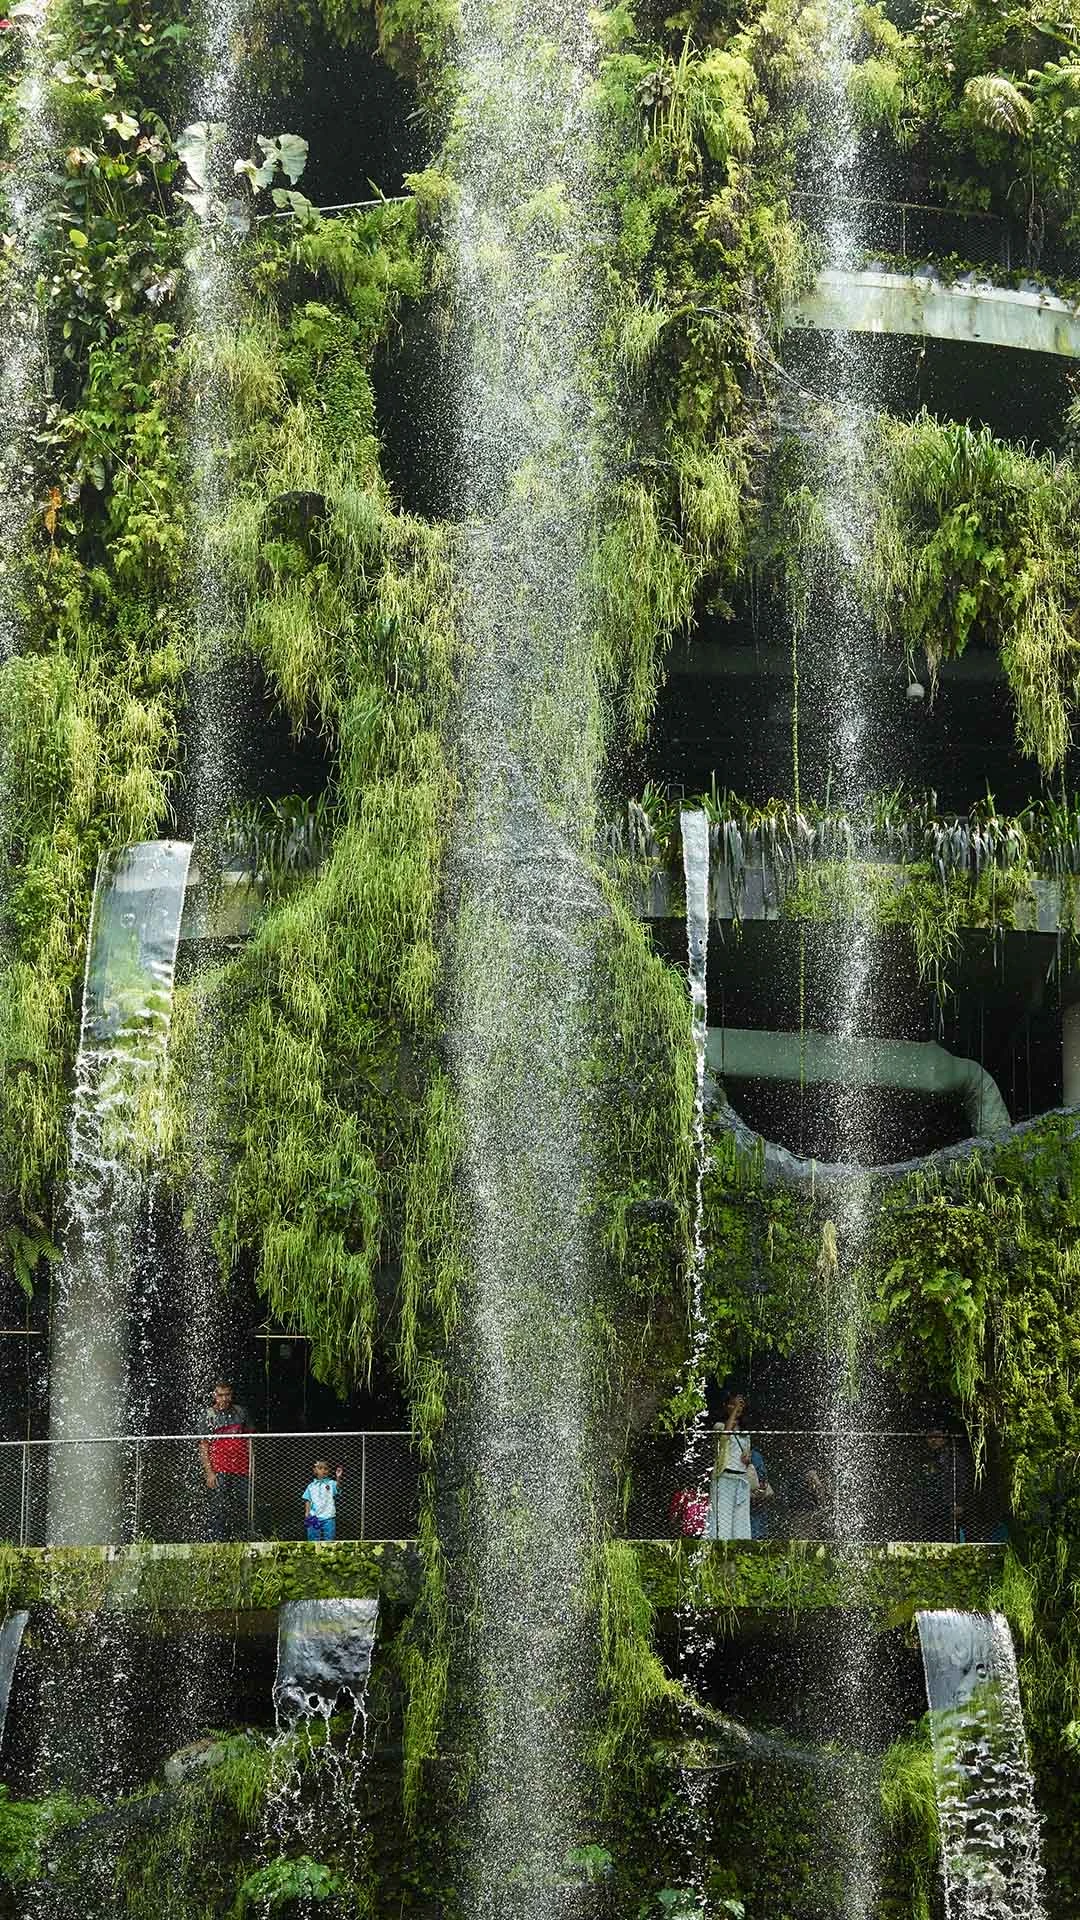 Waterfalls at Gardens by the Bay